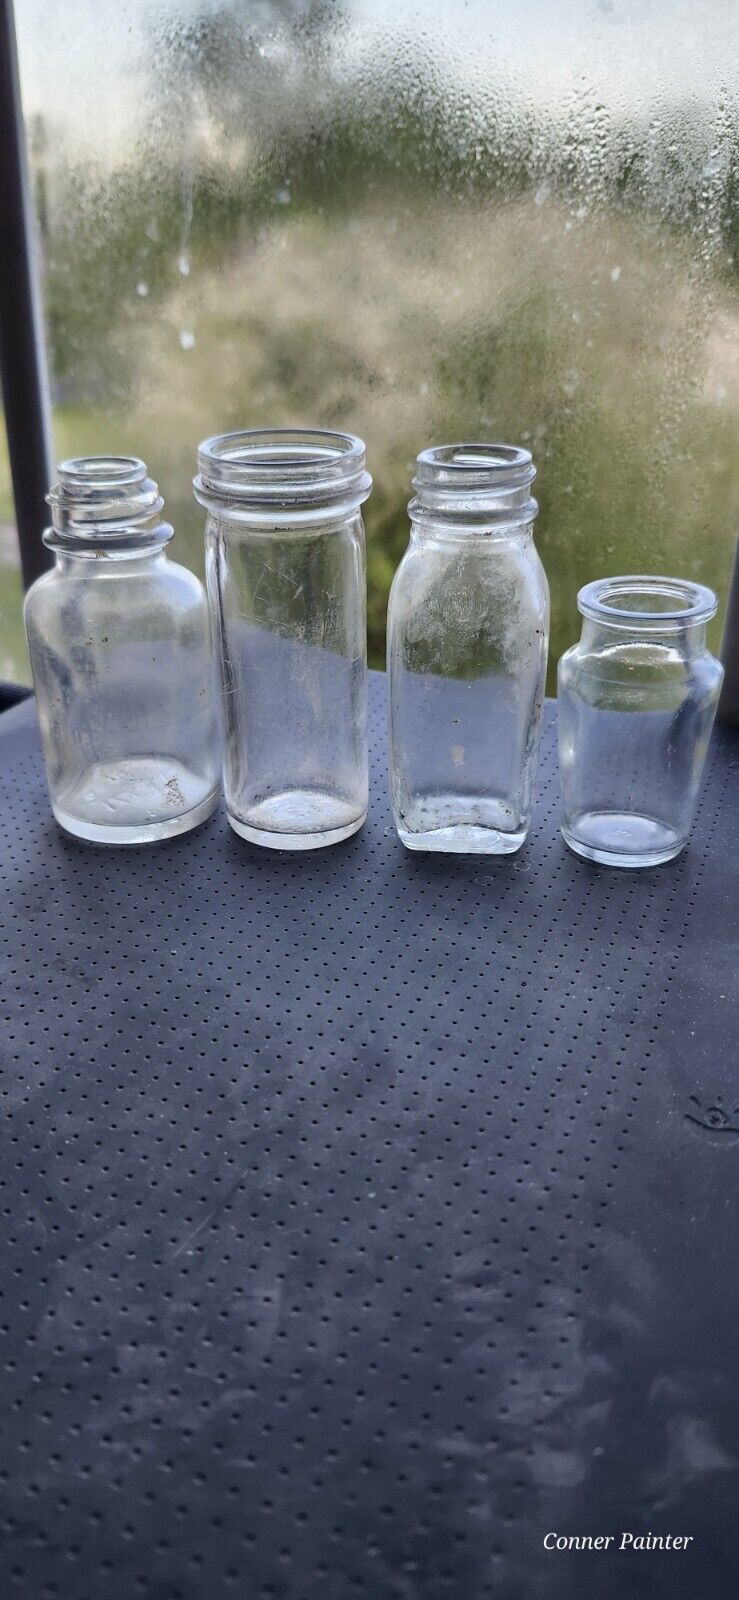 4 Vintage 1940s-60s Small Clear Glass Bottles